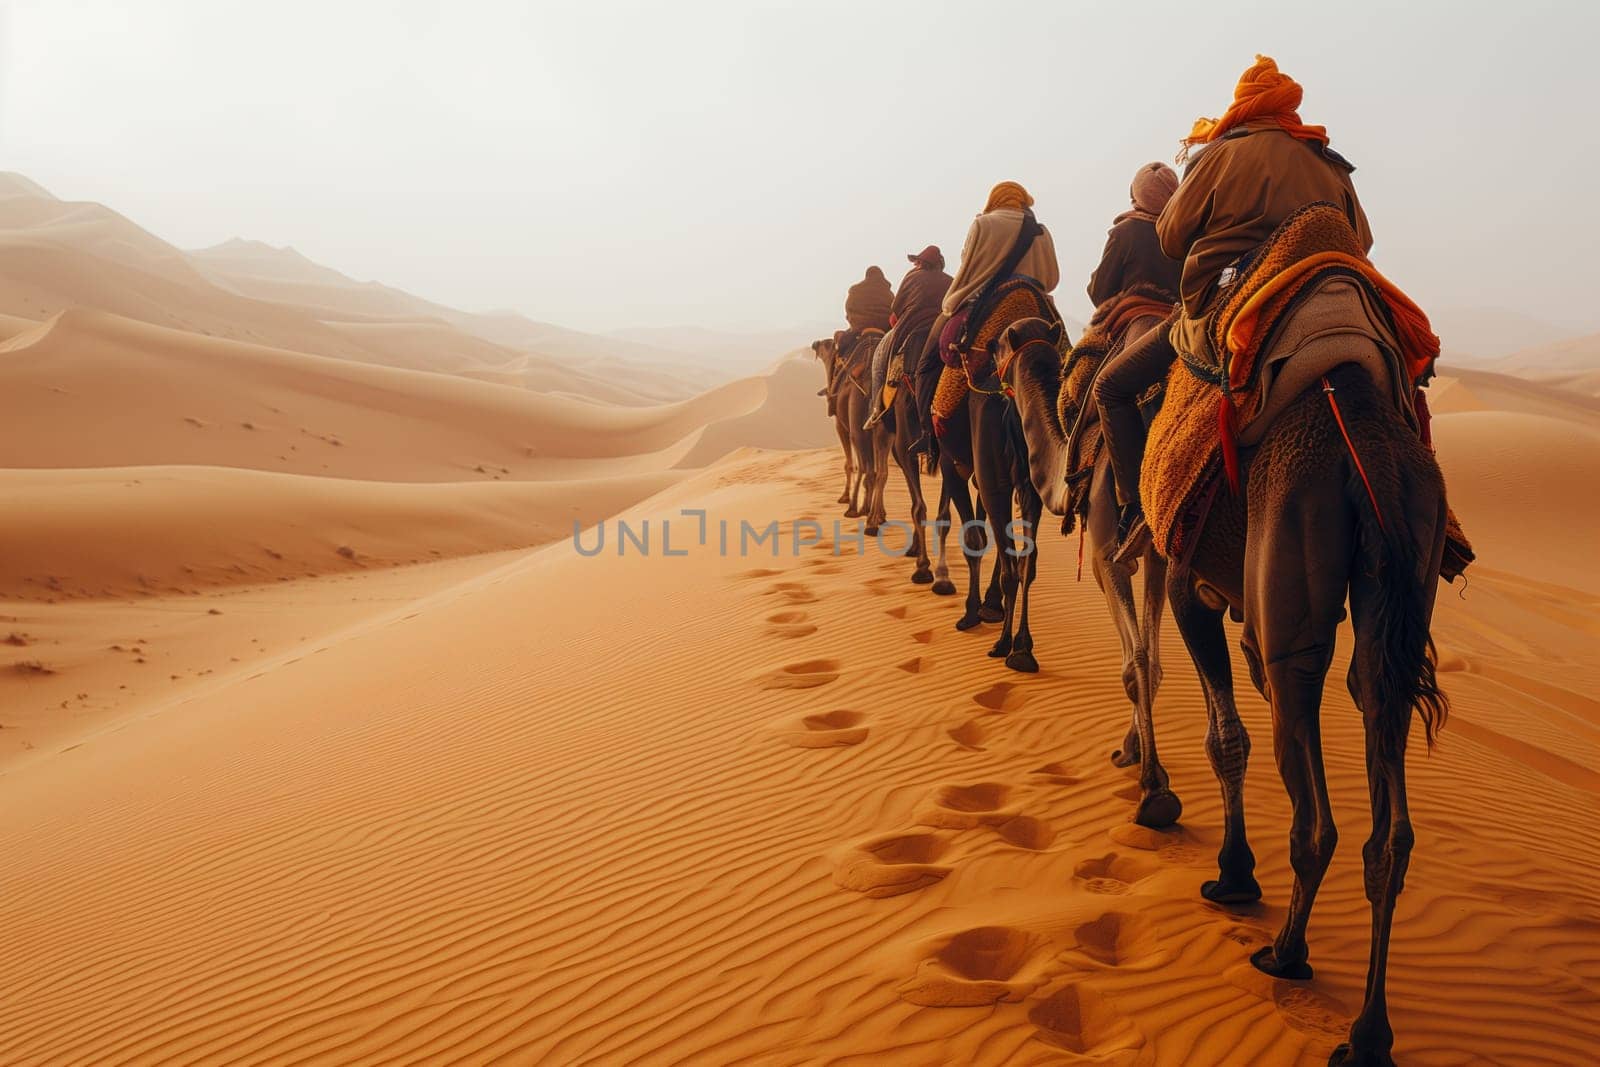 Group using camels as working animals to travel through desert landscape by richwolf